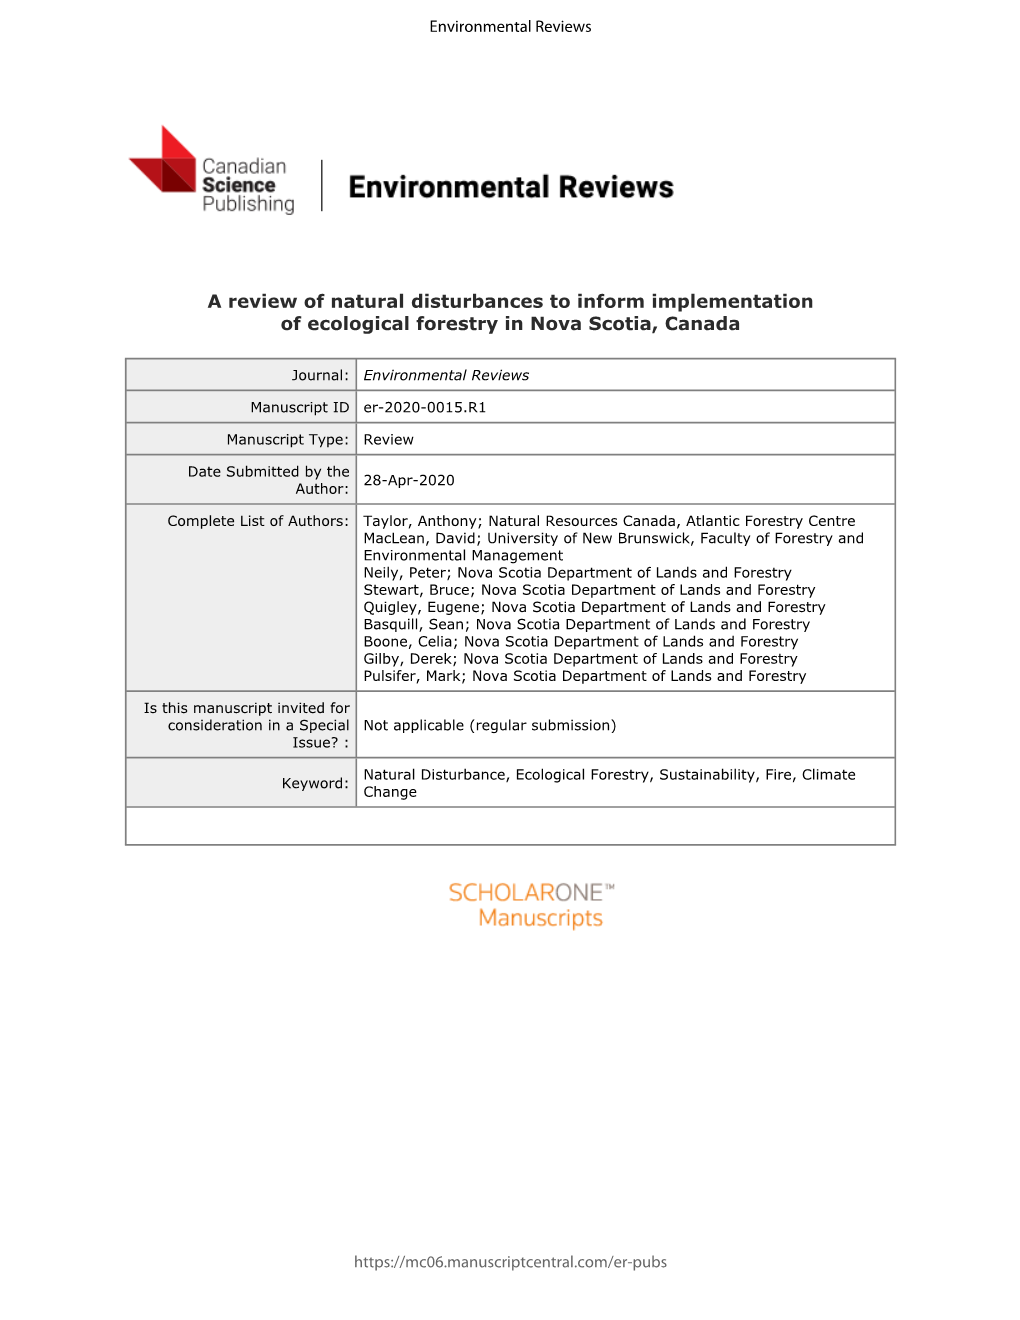 A Review of Natural Disturbances to Inform Implementation of Ecological Forestry in Nova Scotia, Canada